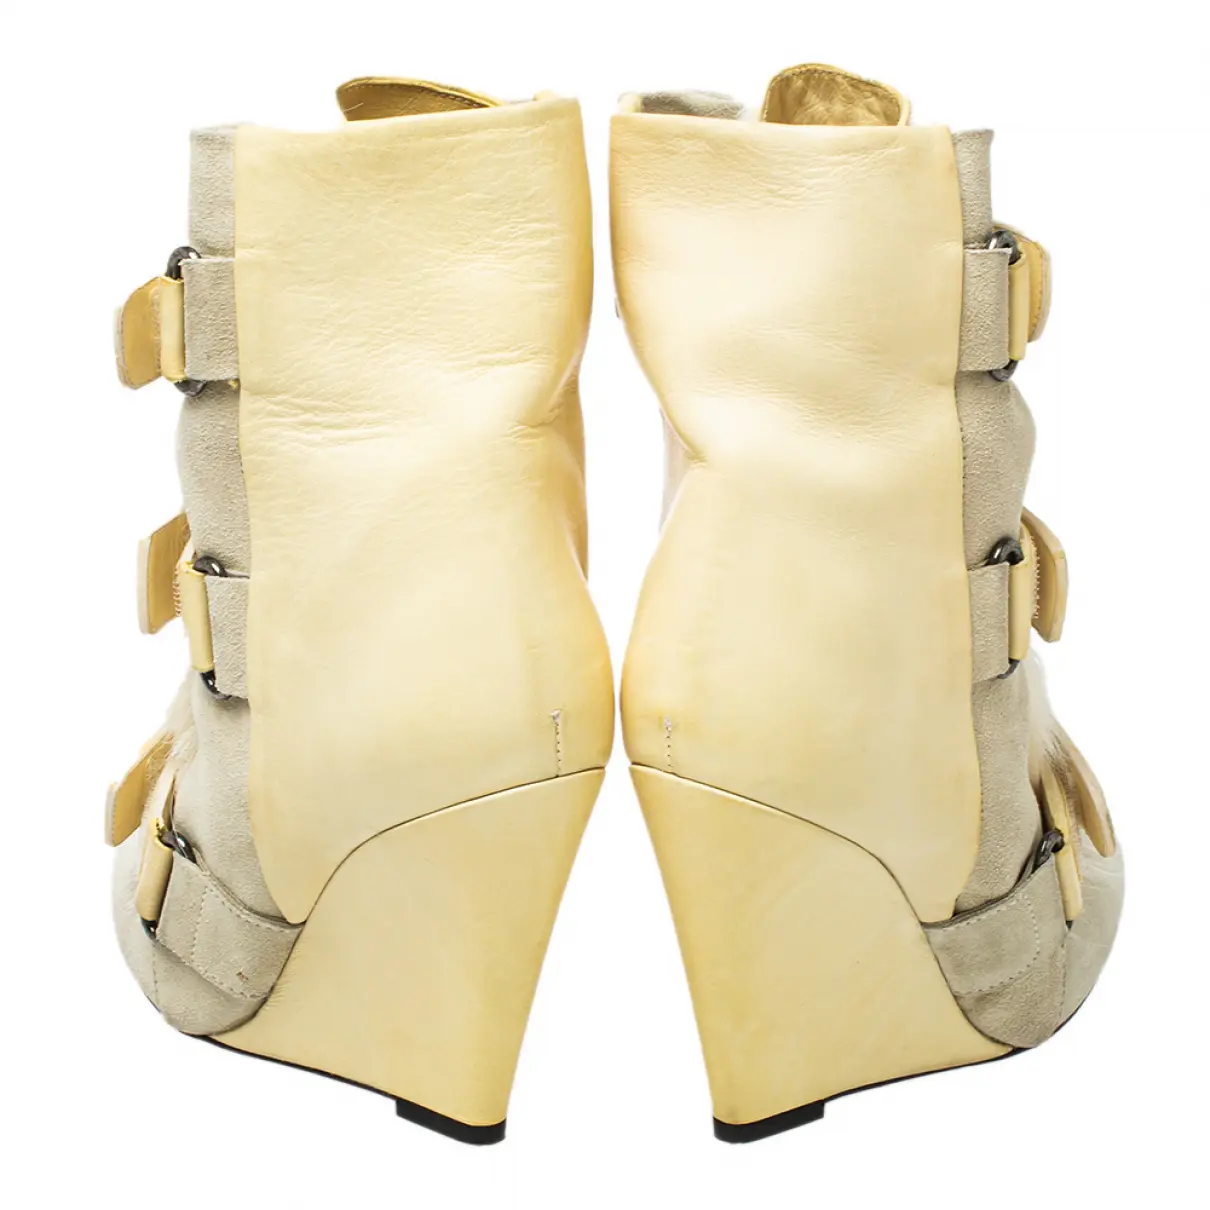 Leather boots Isabel Marant